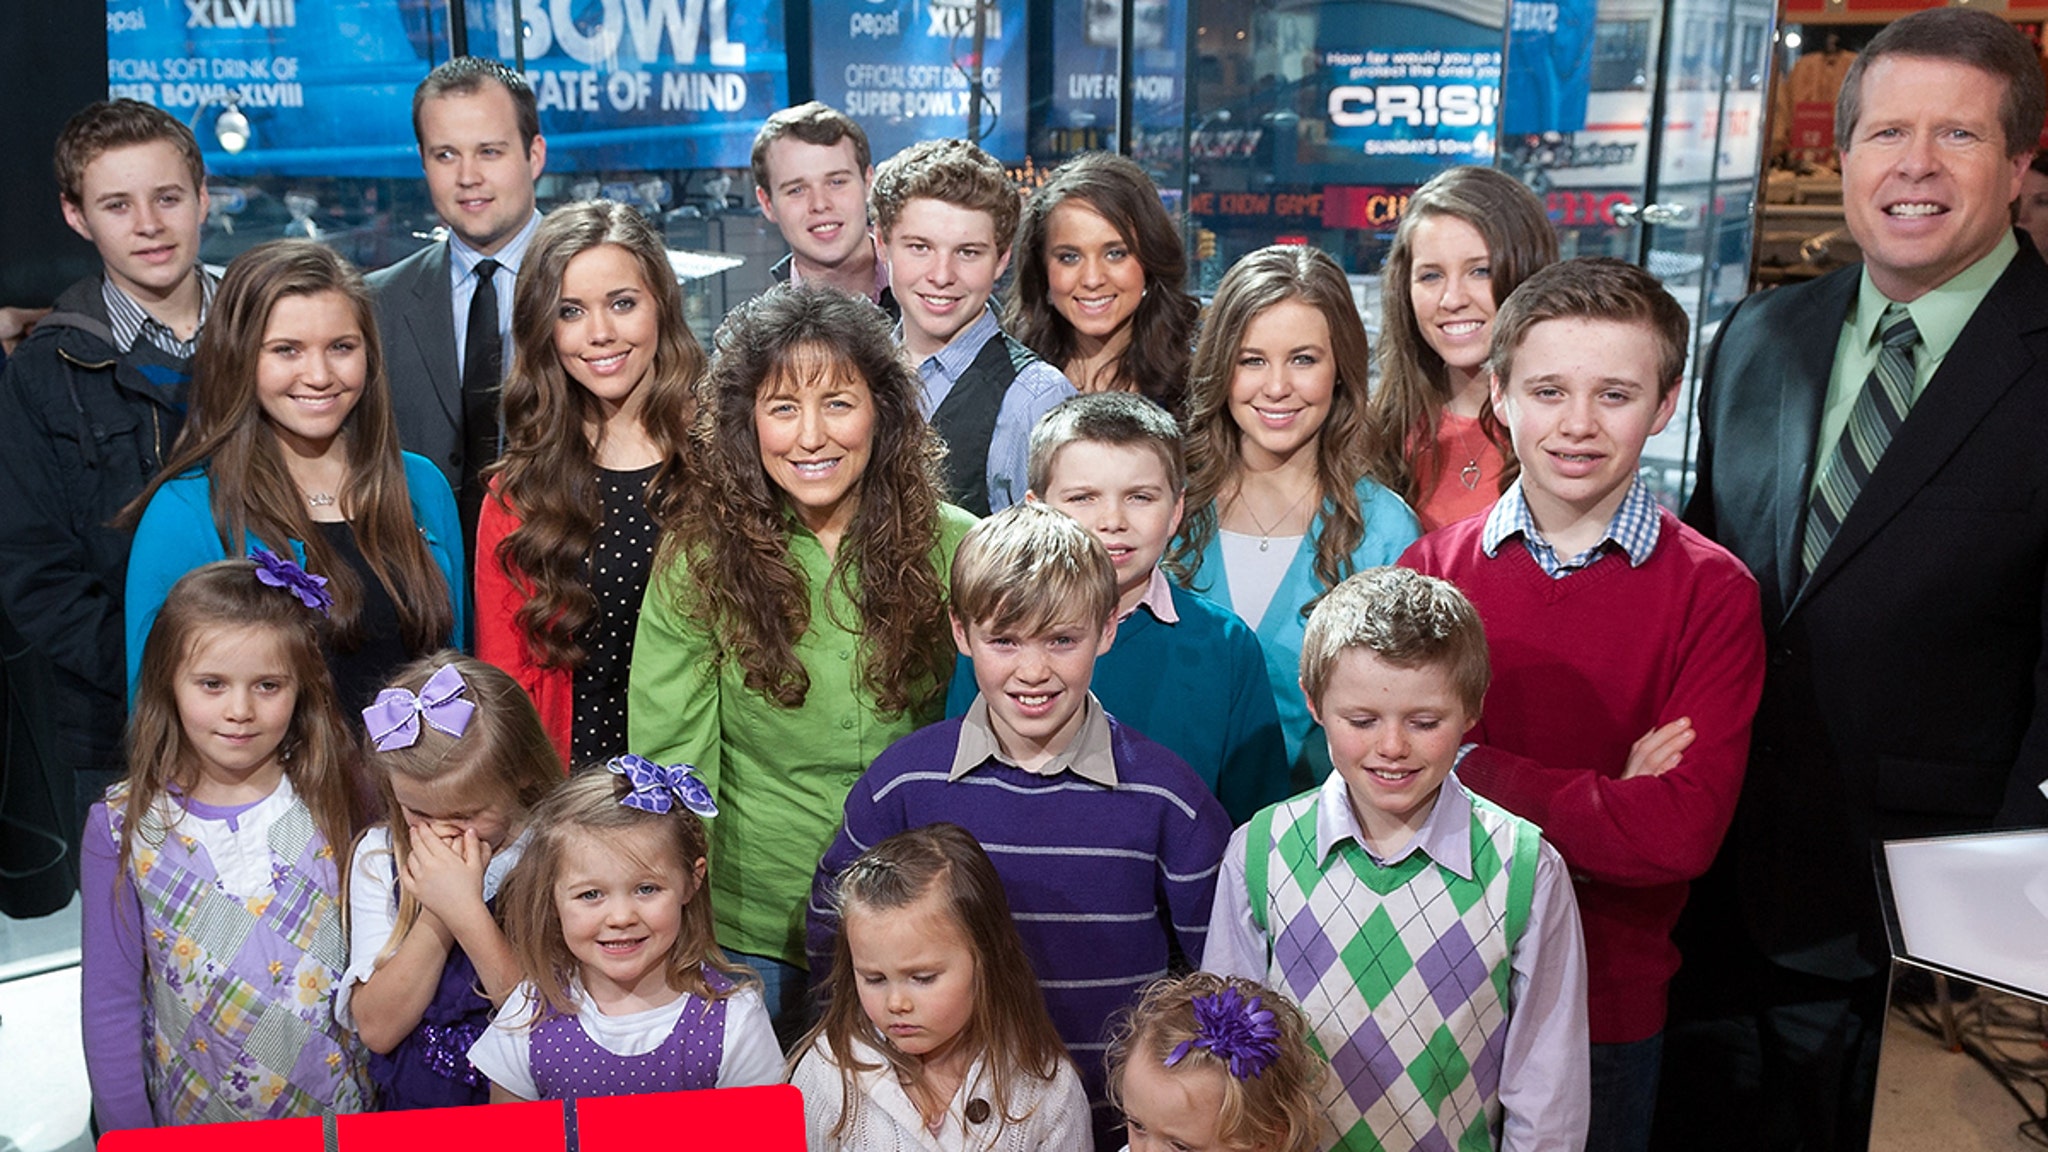 TLC Cancels Duggar Family's 'Counting On' Amid Josh's Child Porn Case